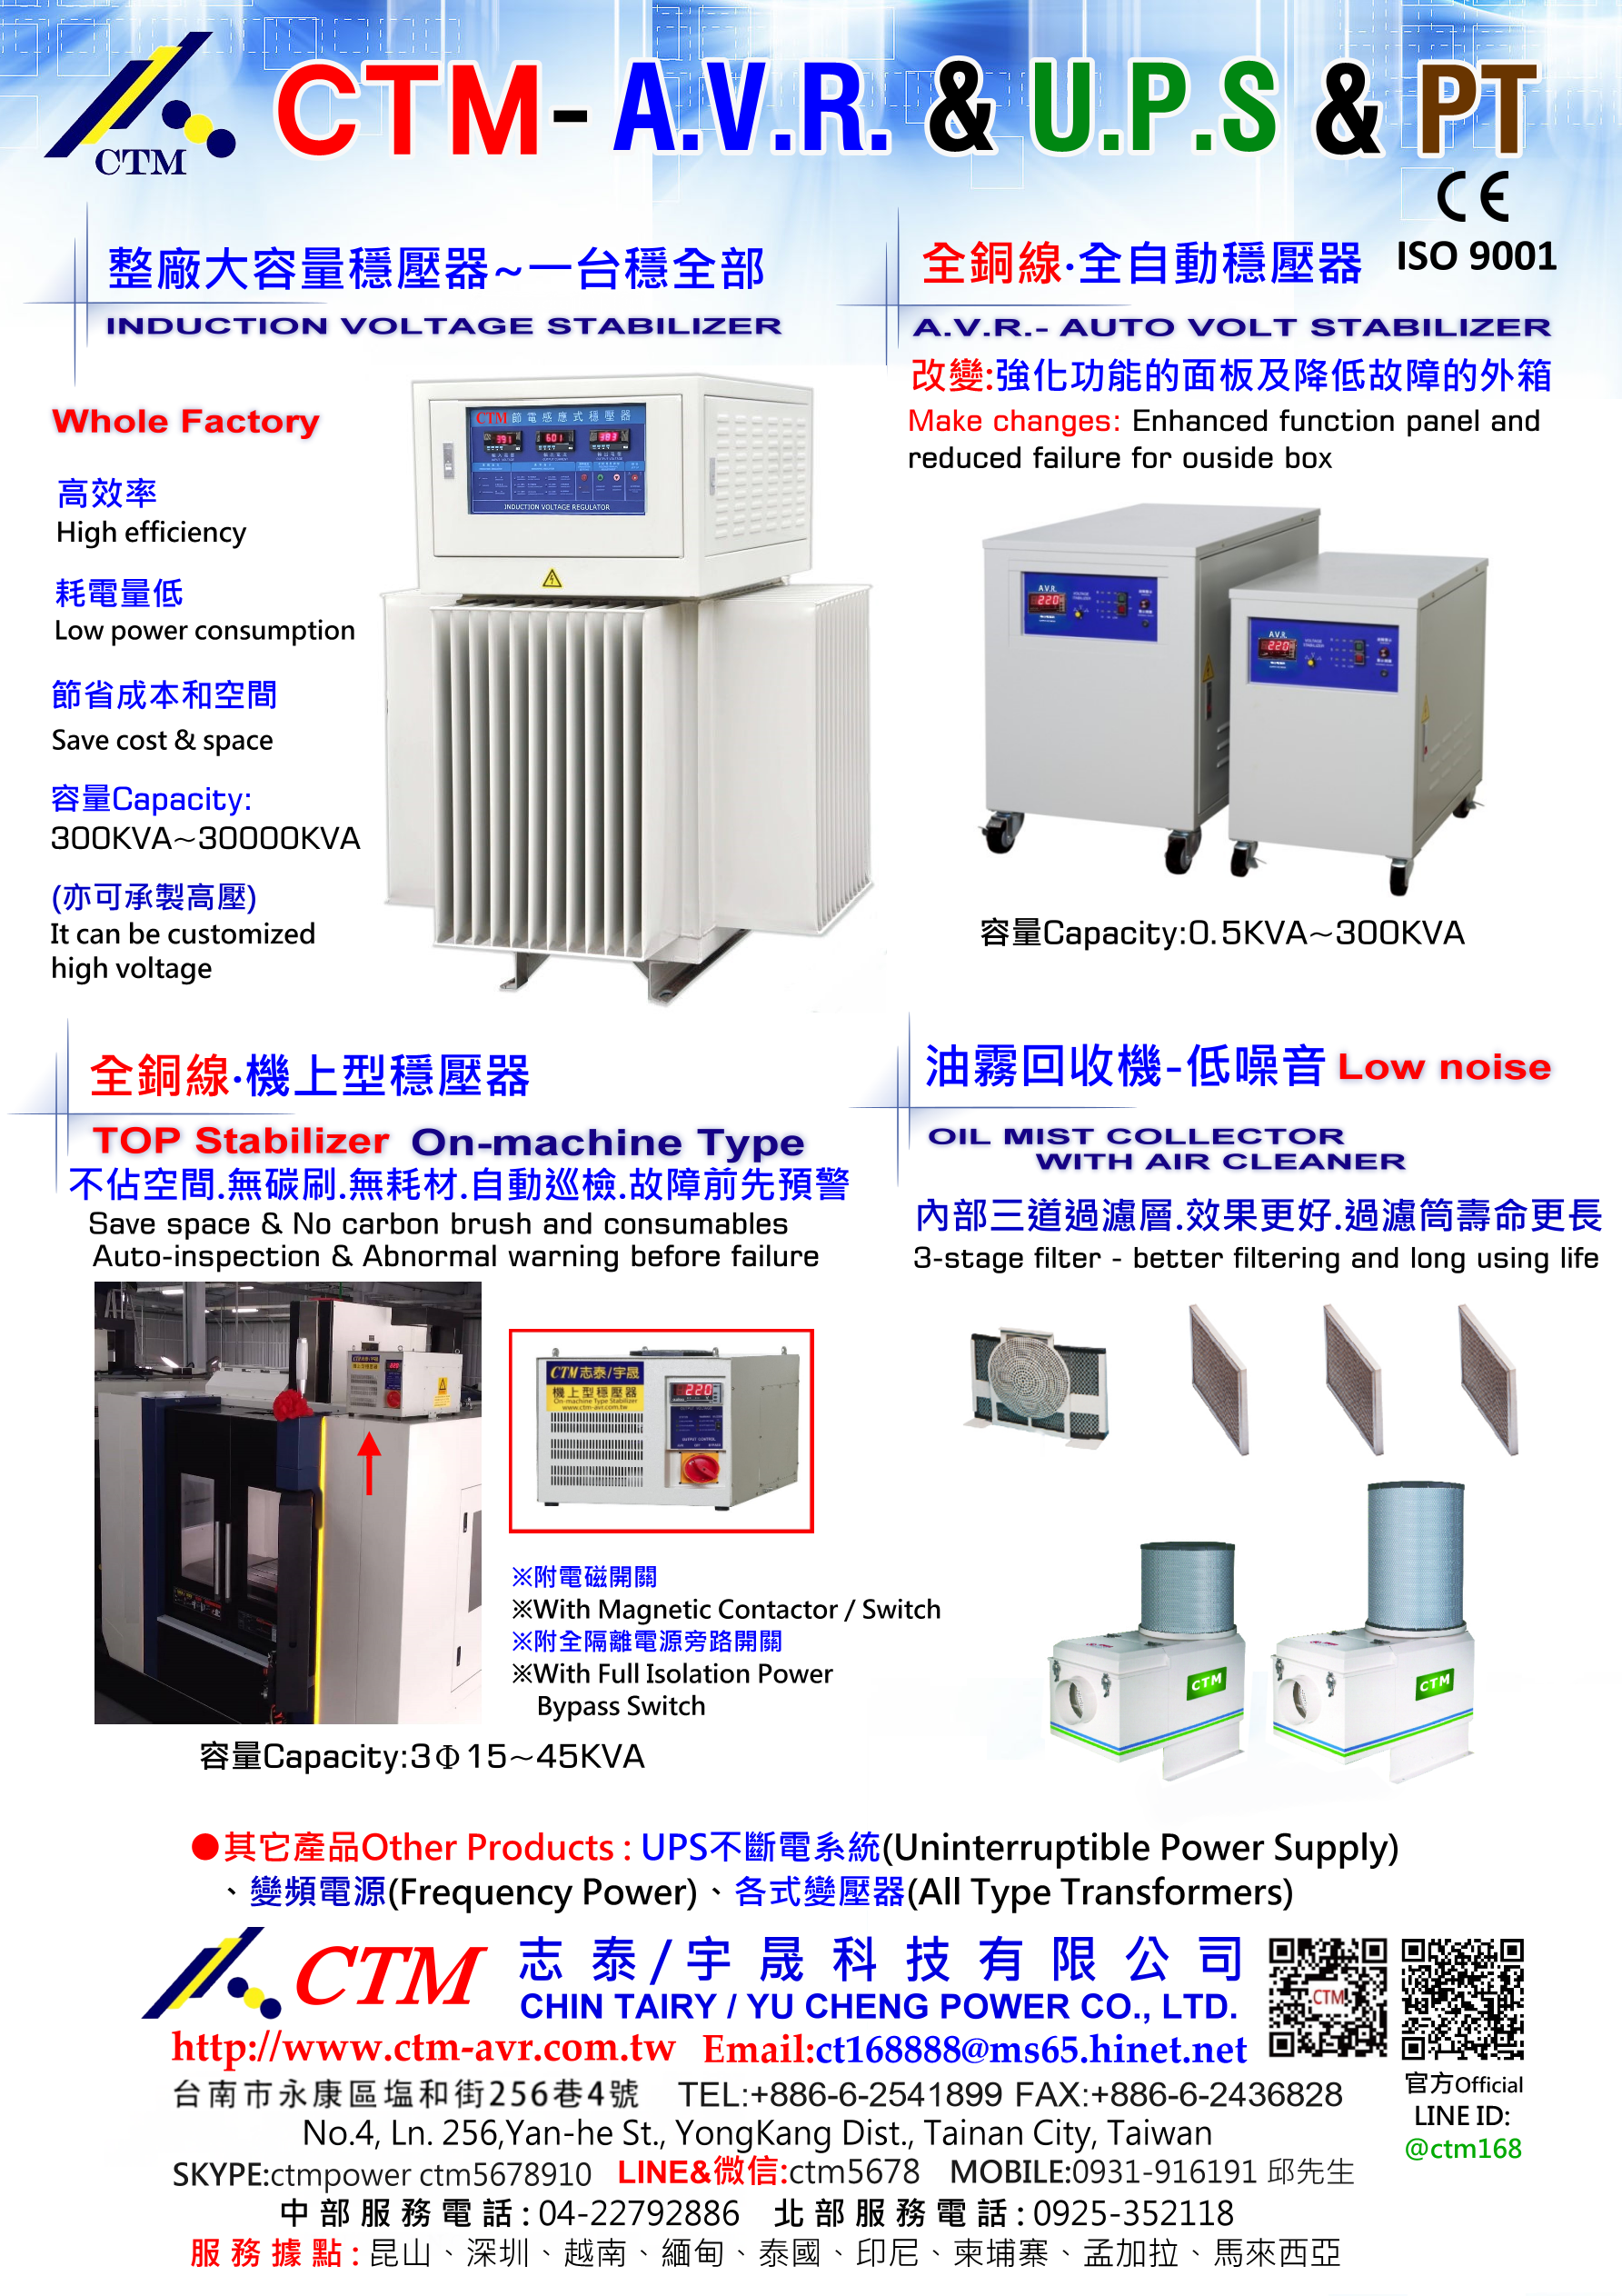 Voltage regulator products - CTM Taiwan